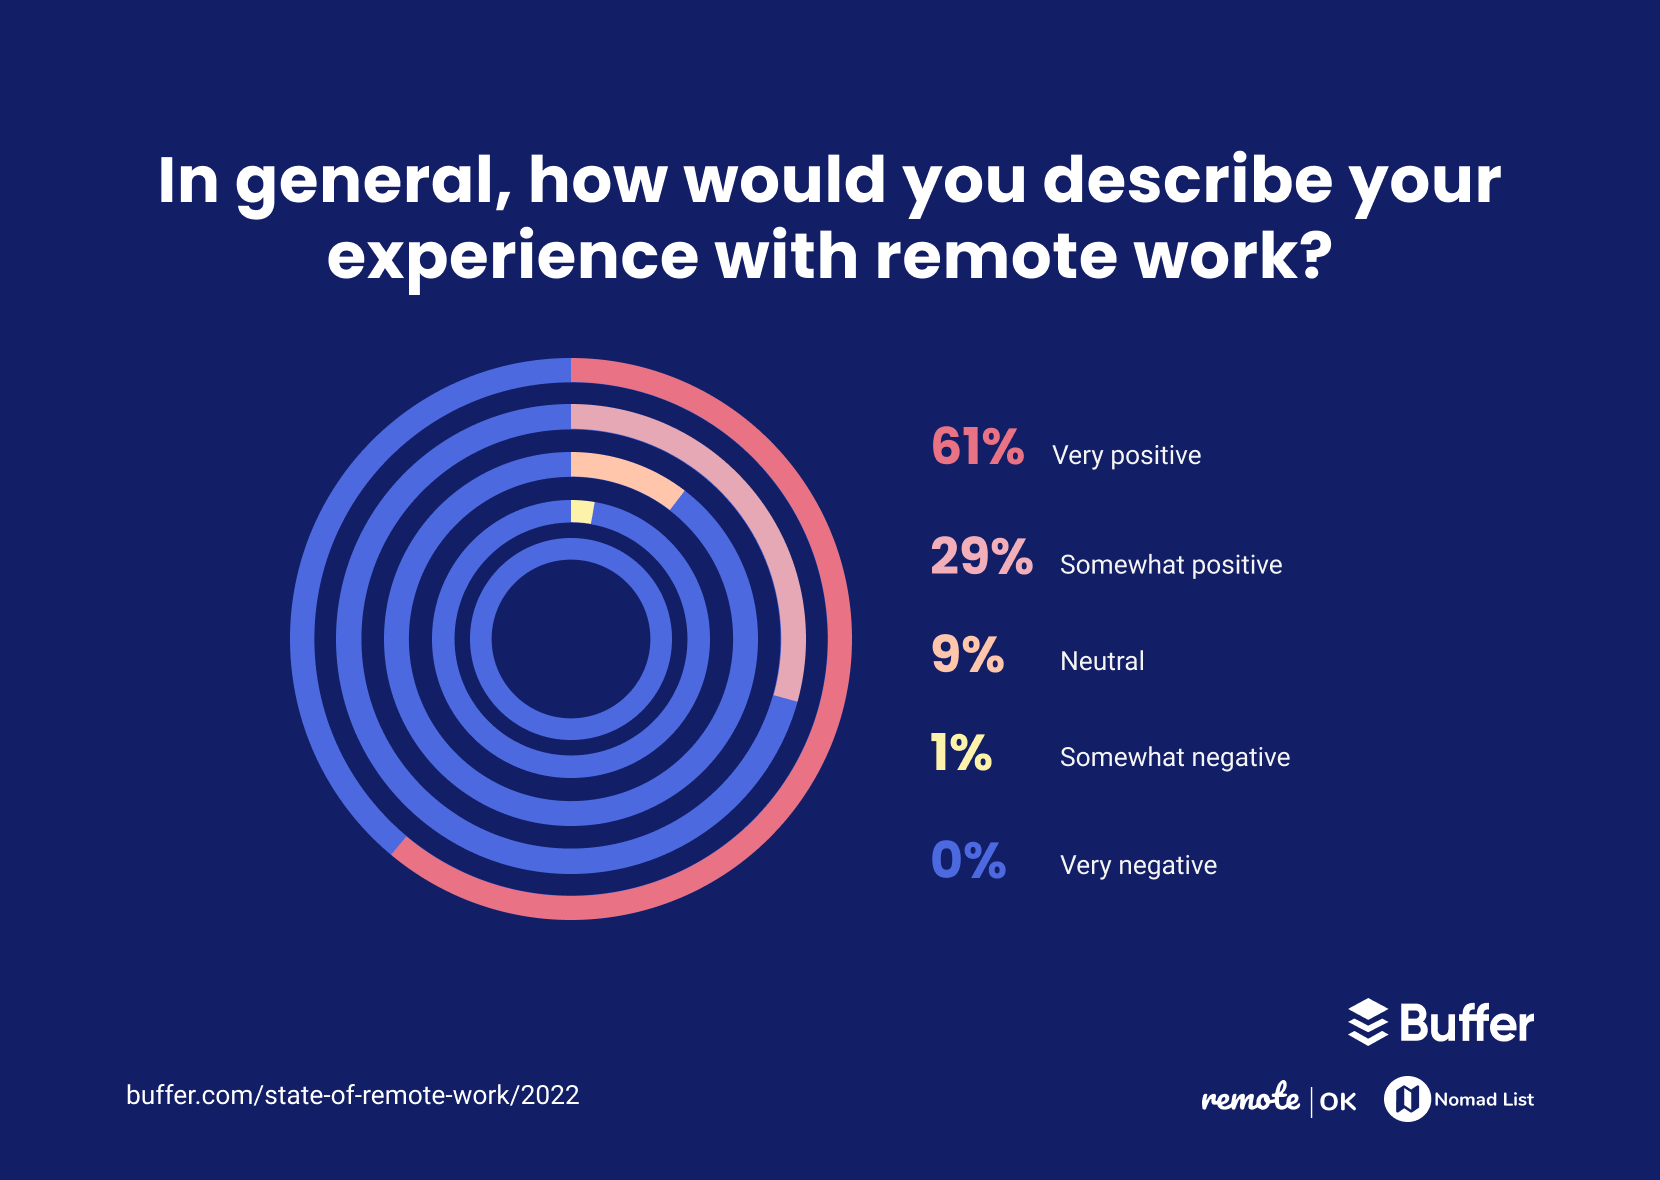 90% of workers said that they found remote working a positive or somewhat positive experience